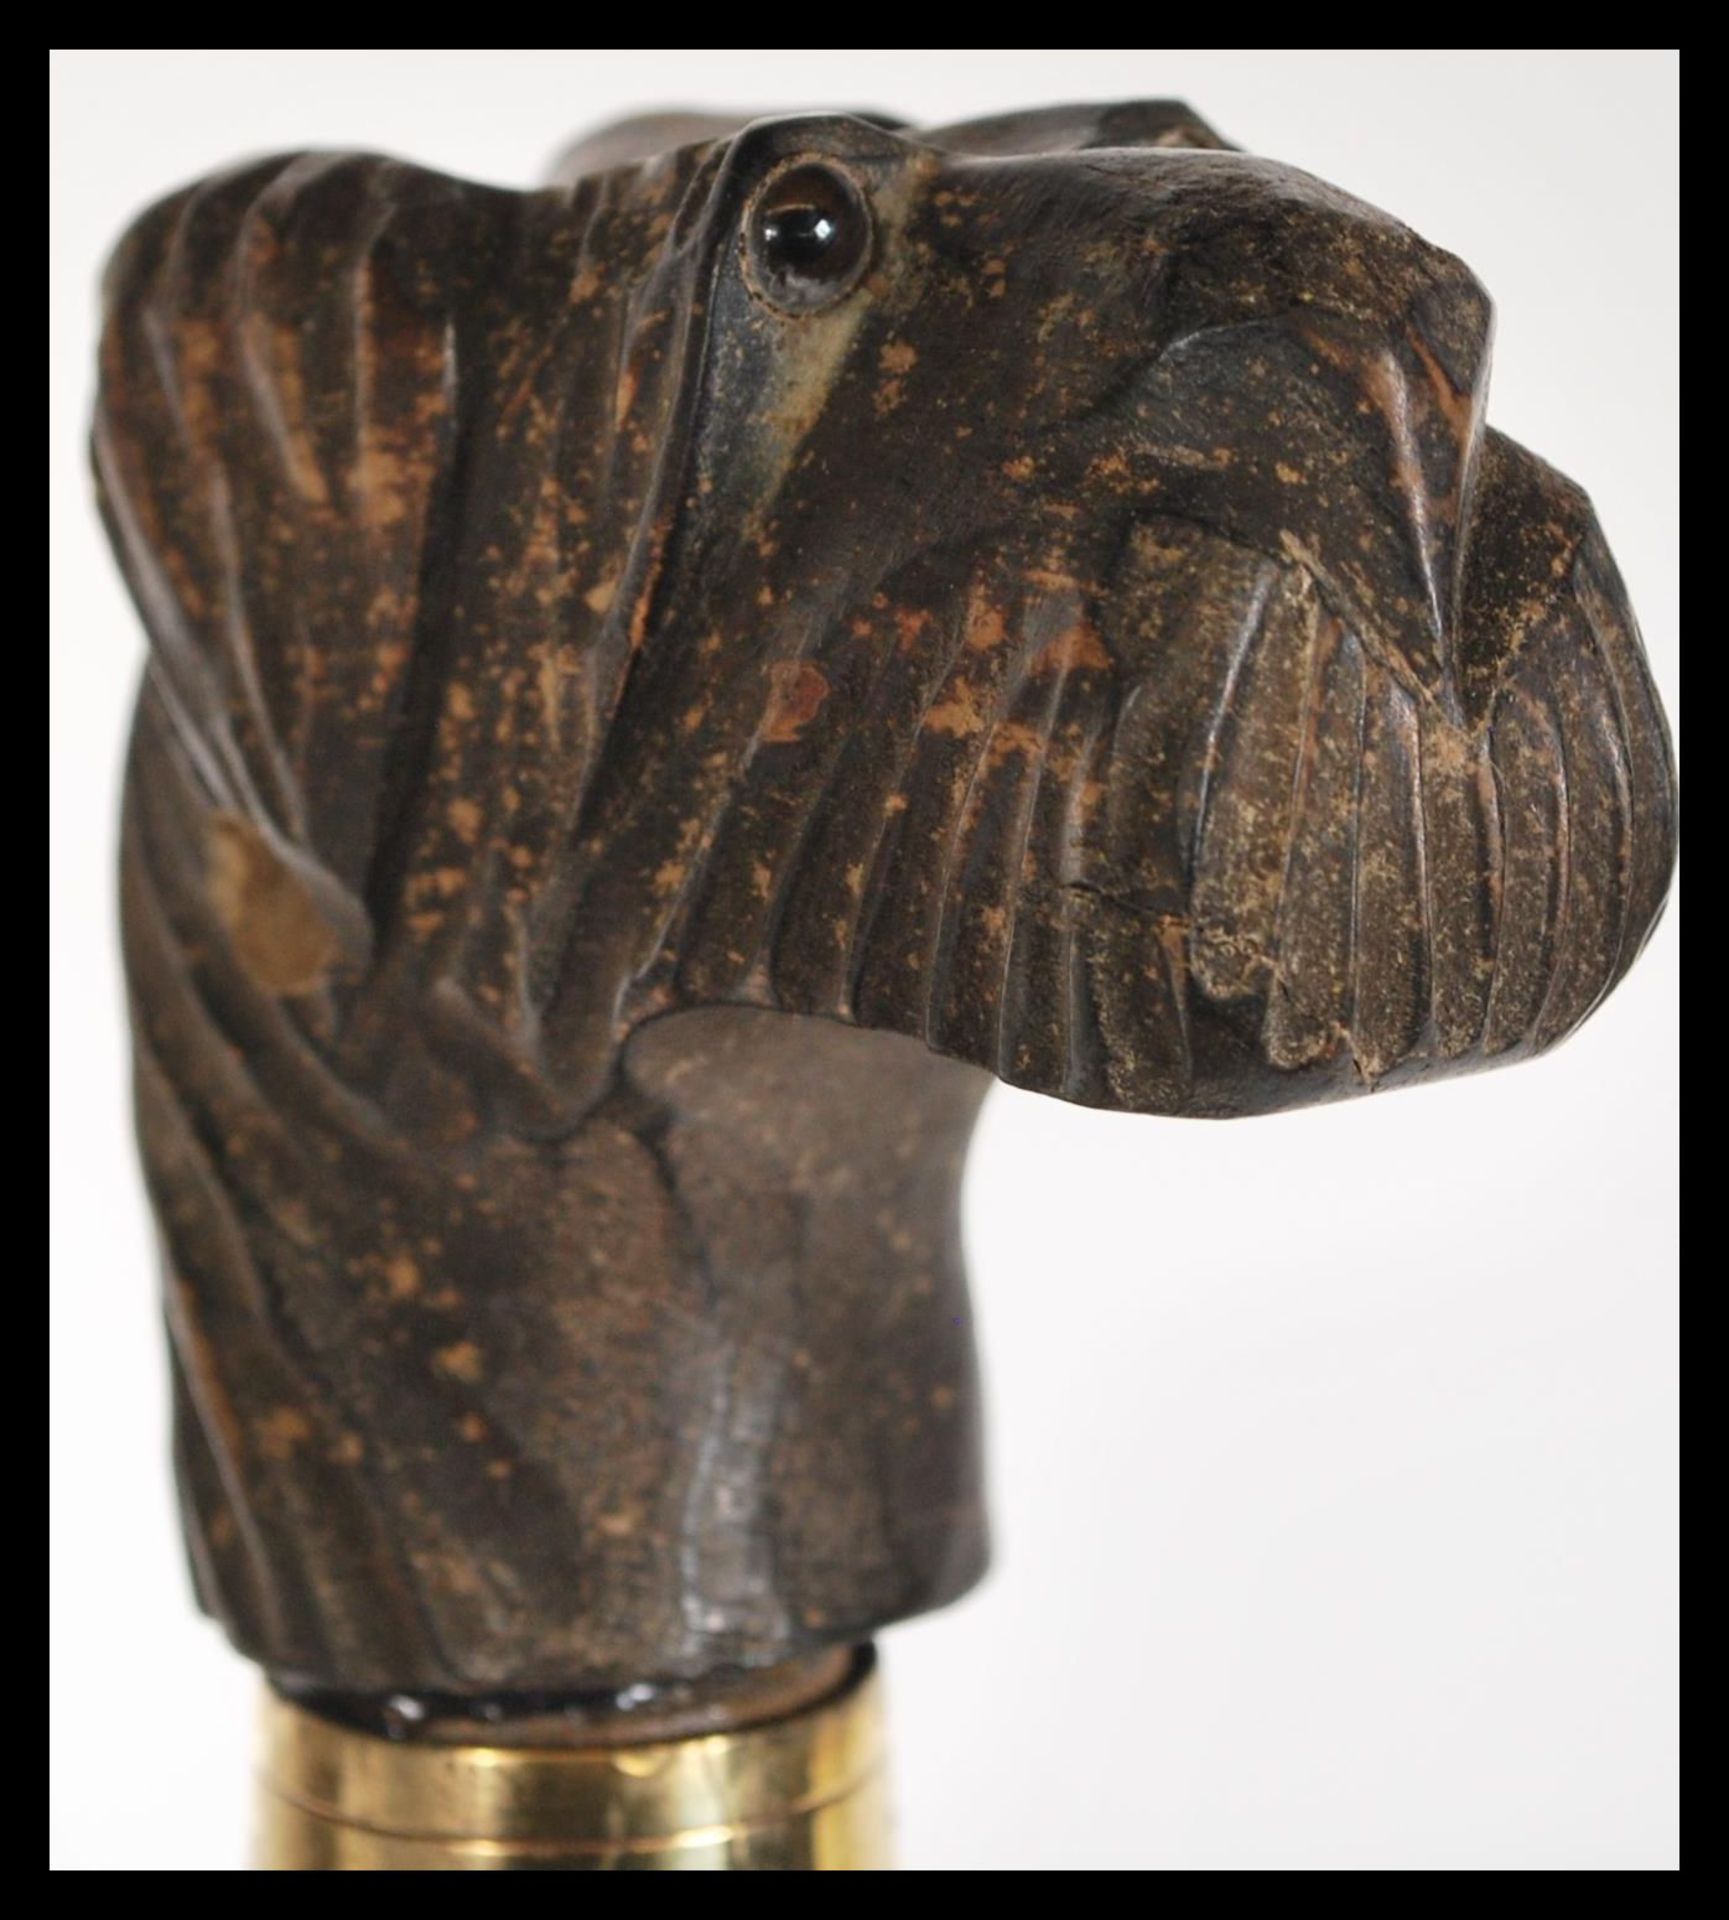 A malacca walking stick having a carved wooden dogs head knop / handle to the top with glass eyes.